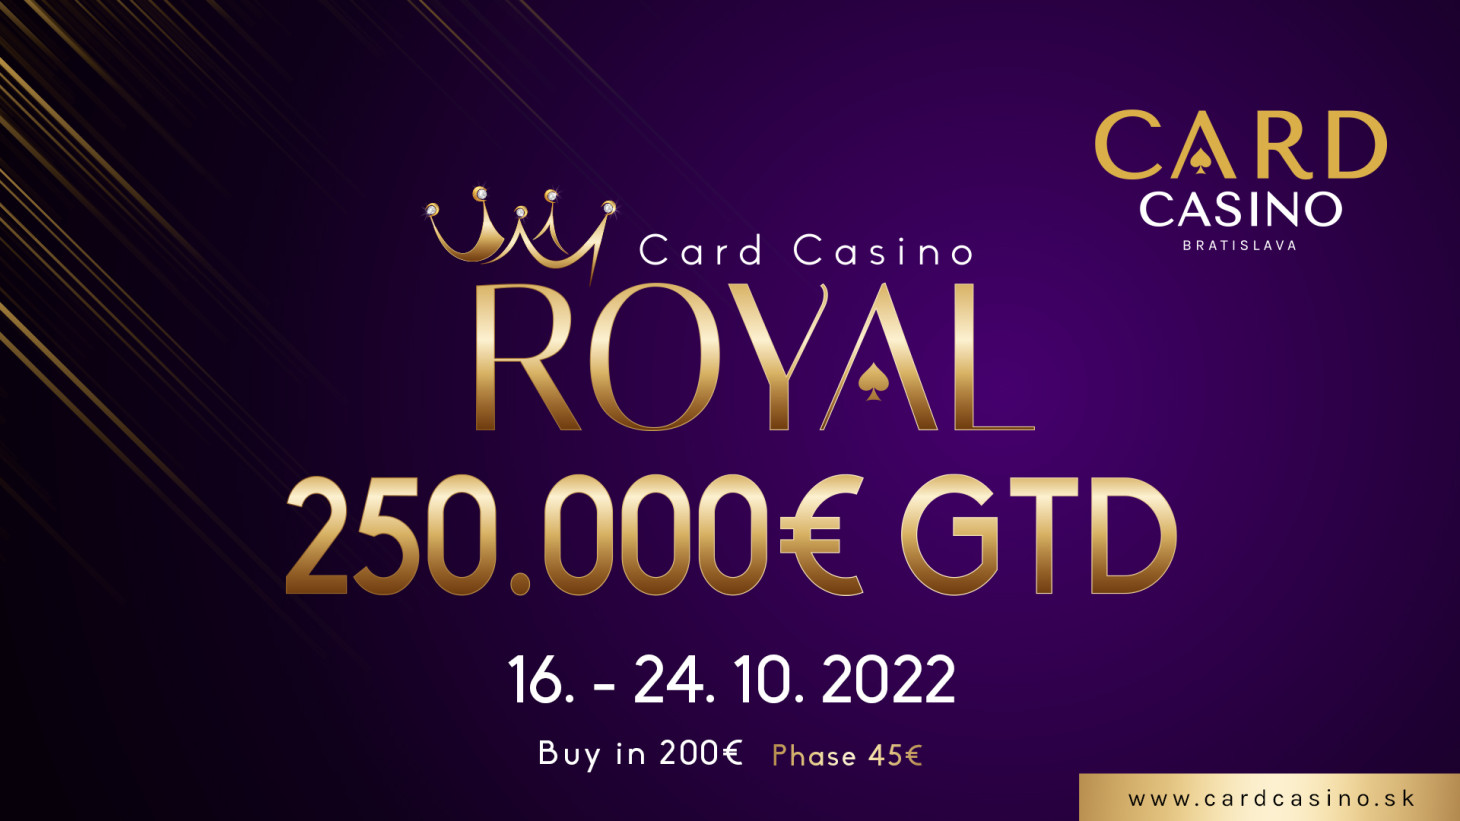 Get ready for a unique tournament. The €250,000 GTD Card Casino ROYAL will be played in October